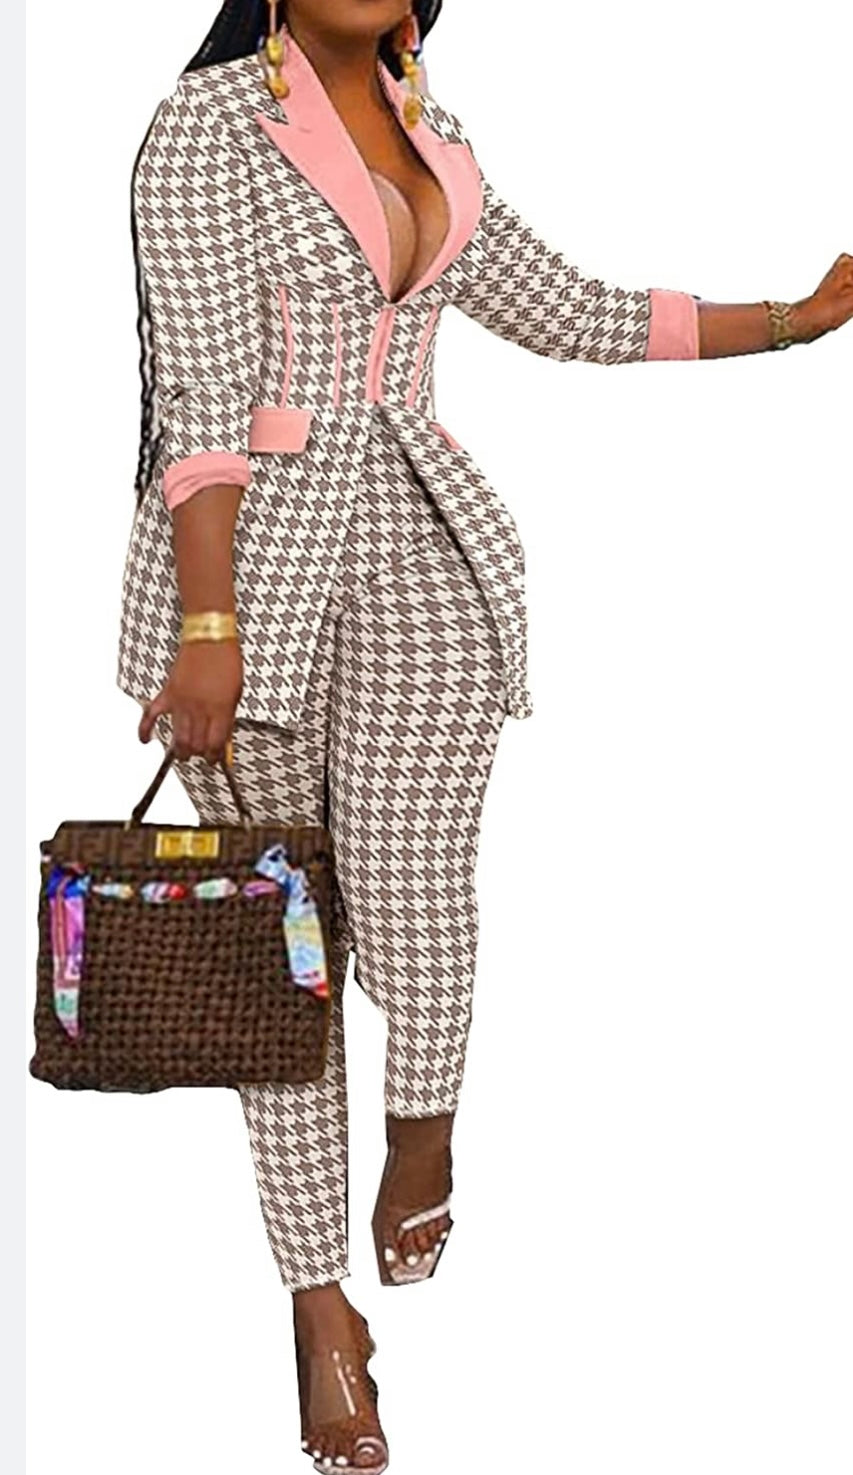 houndstooth pant suit